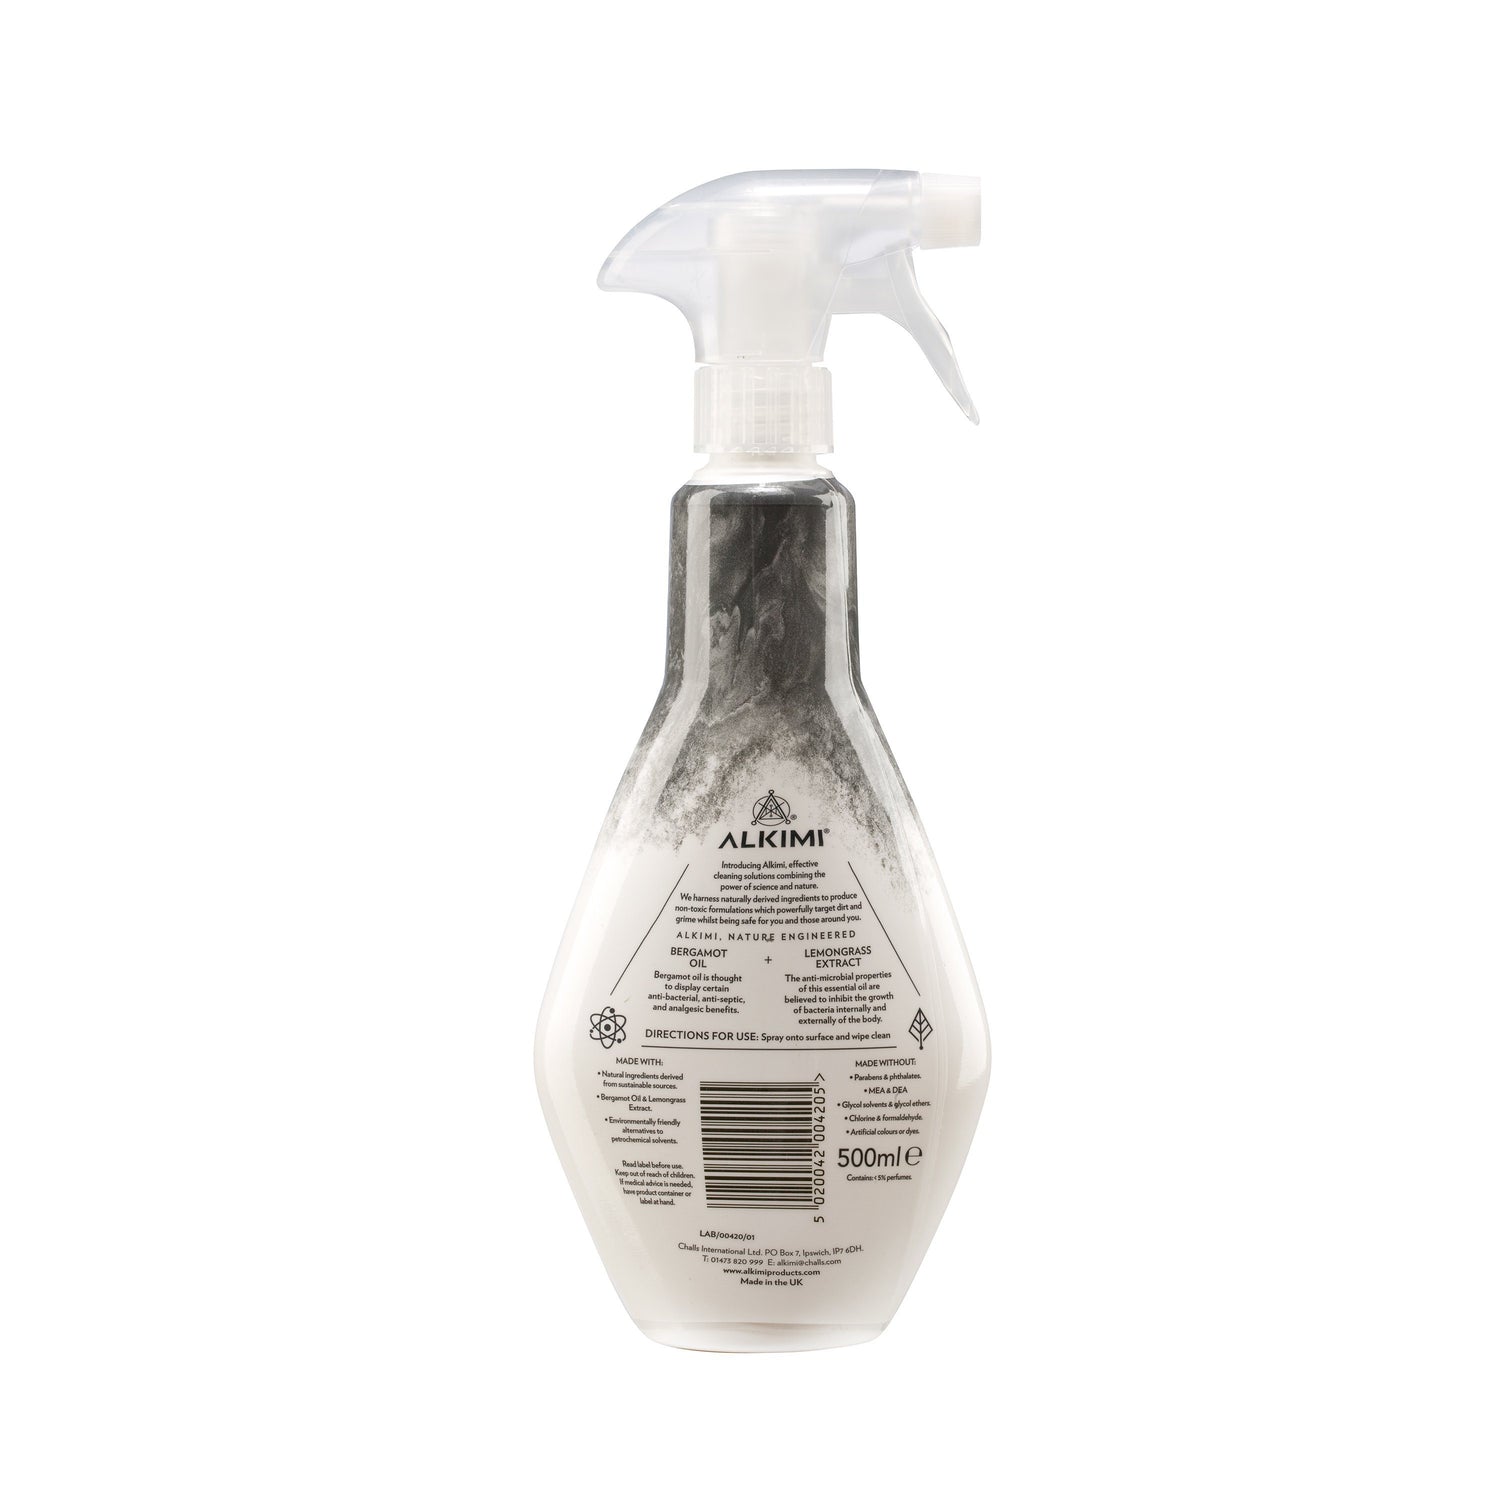 ALKIMI Shiny Surface Cleaner 500ml - Bloom Concept